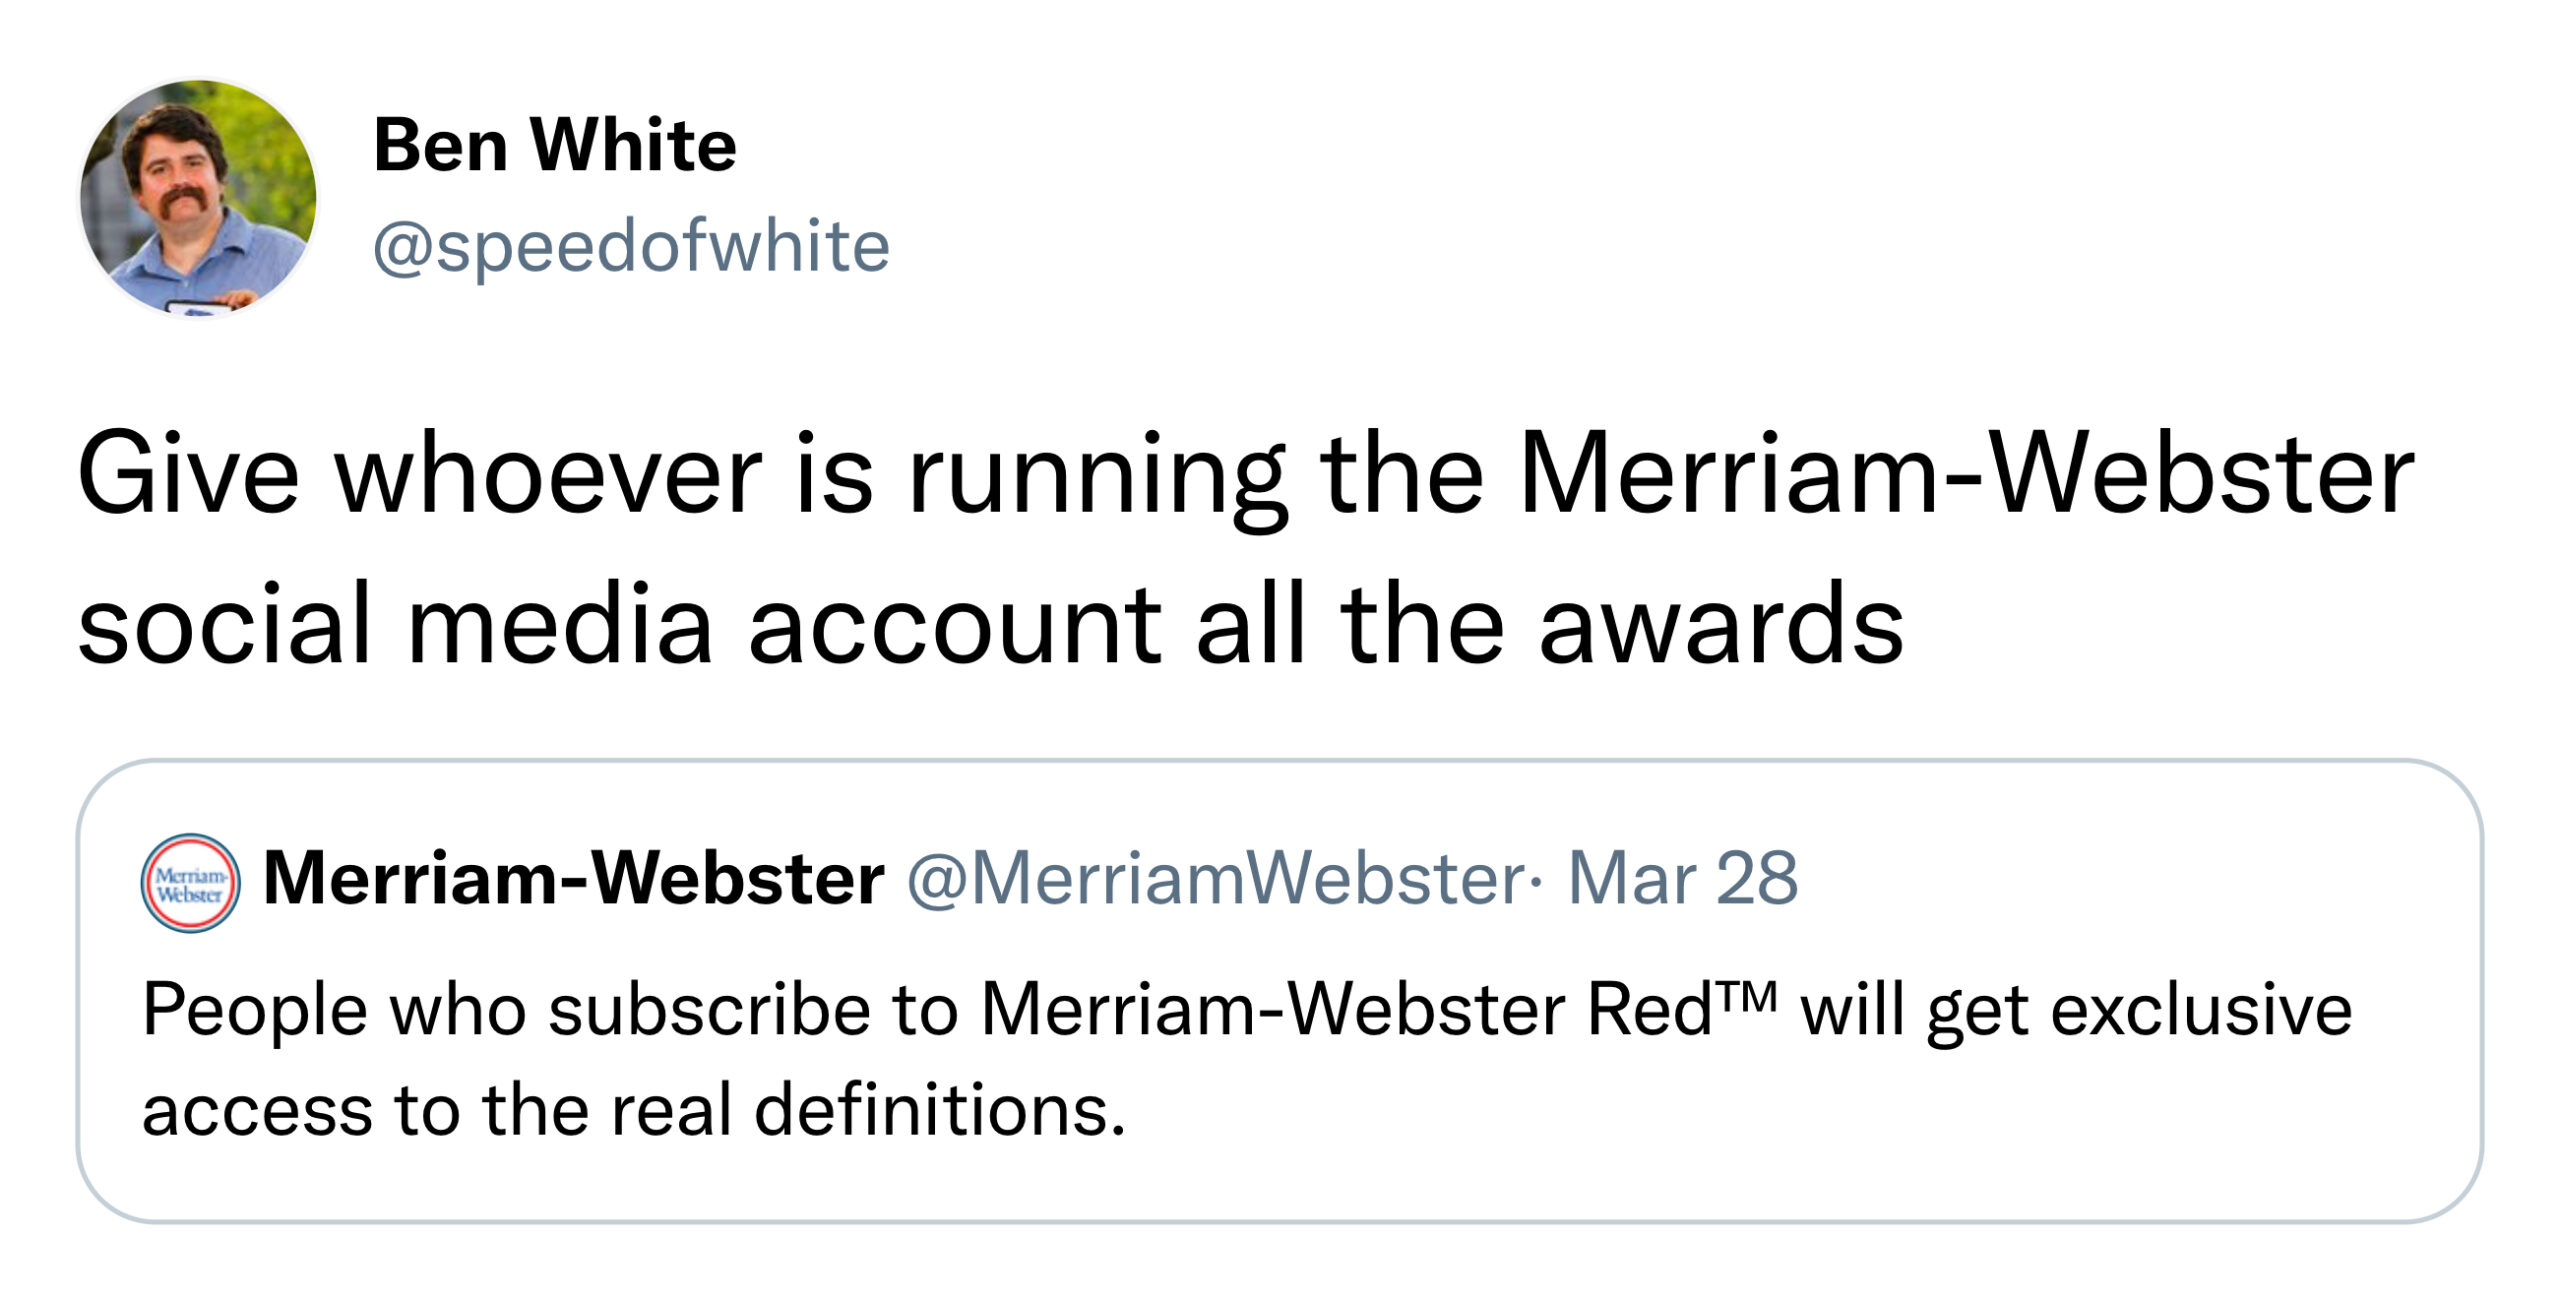 merriam webster trolls - give who's running this account all the awards